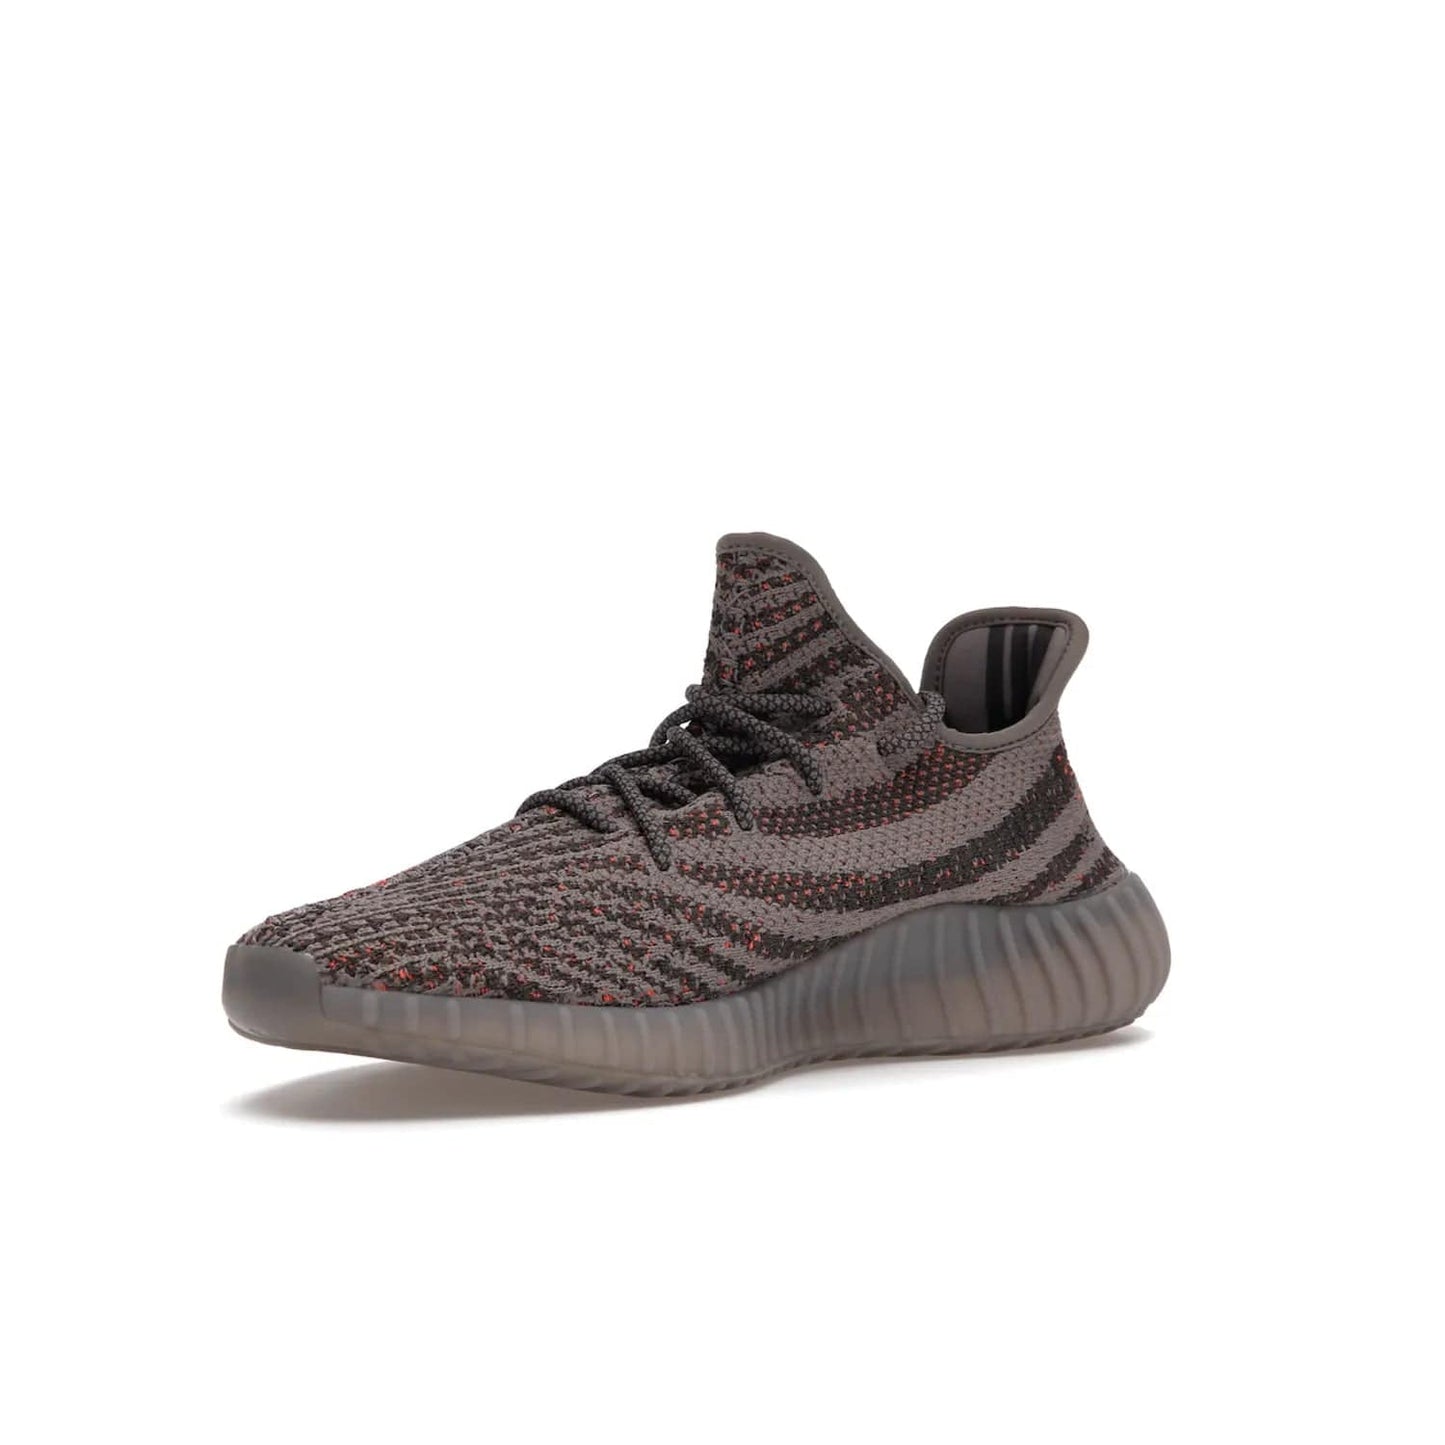 adidas Yeezy Boost 350 V2 Beluga Reflective - Image 15 - Only at www.BallersClubKickz.com - Shop the adidas Yeezy Boost 350 V2 Beluga Reflective: a stylish, reflective sneaker that stands out. Featuring Boost sole, Primeknit upper & signature orange stripe. Available Dec 2021.